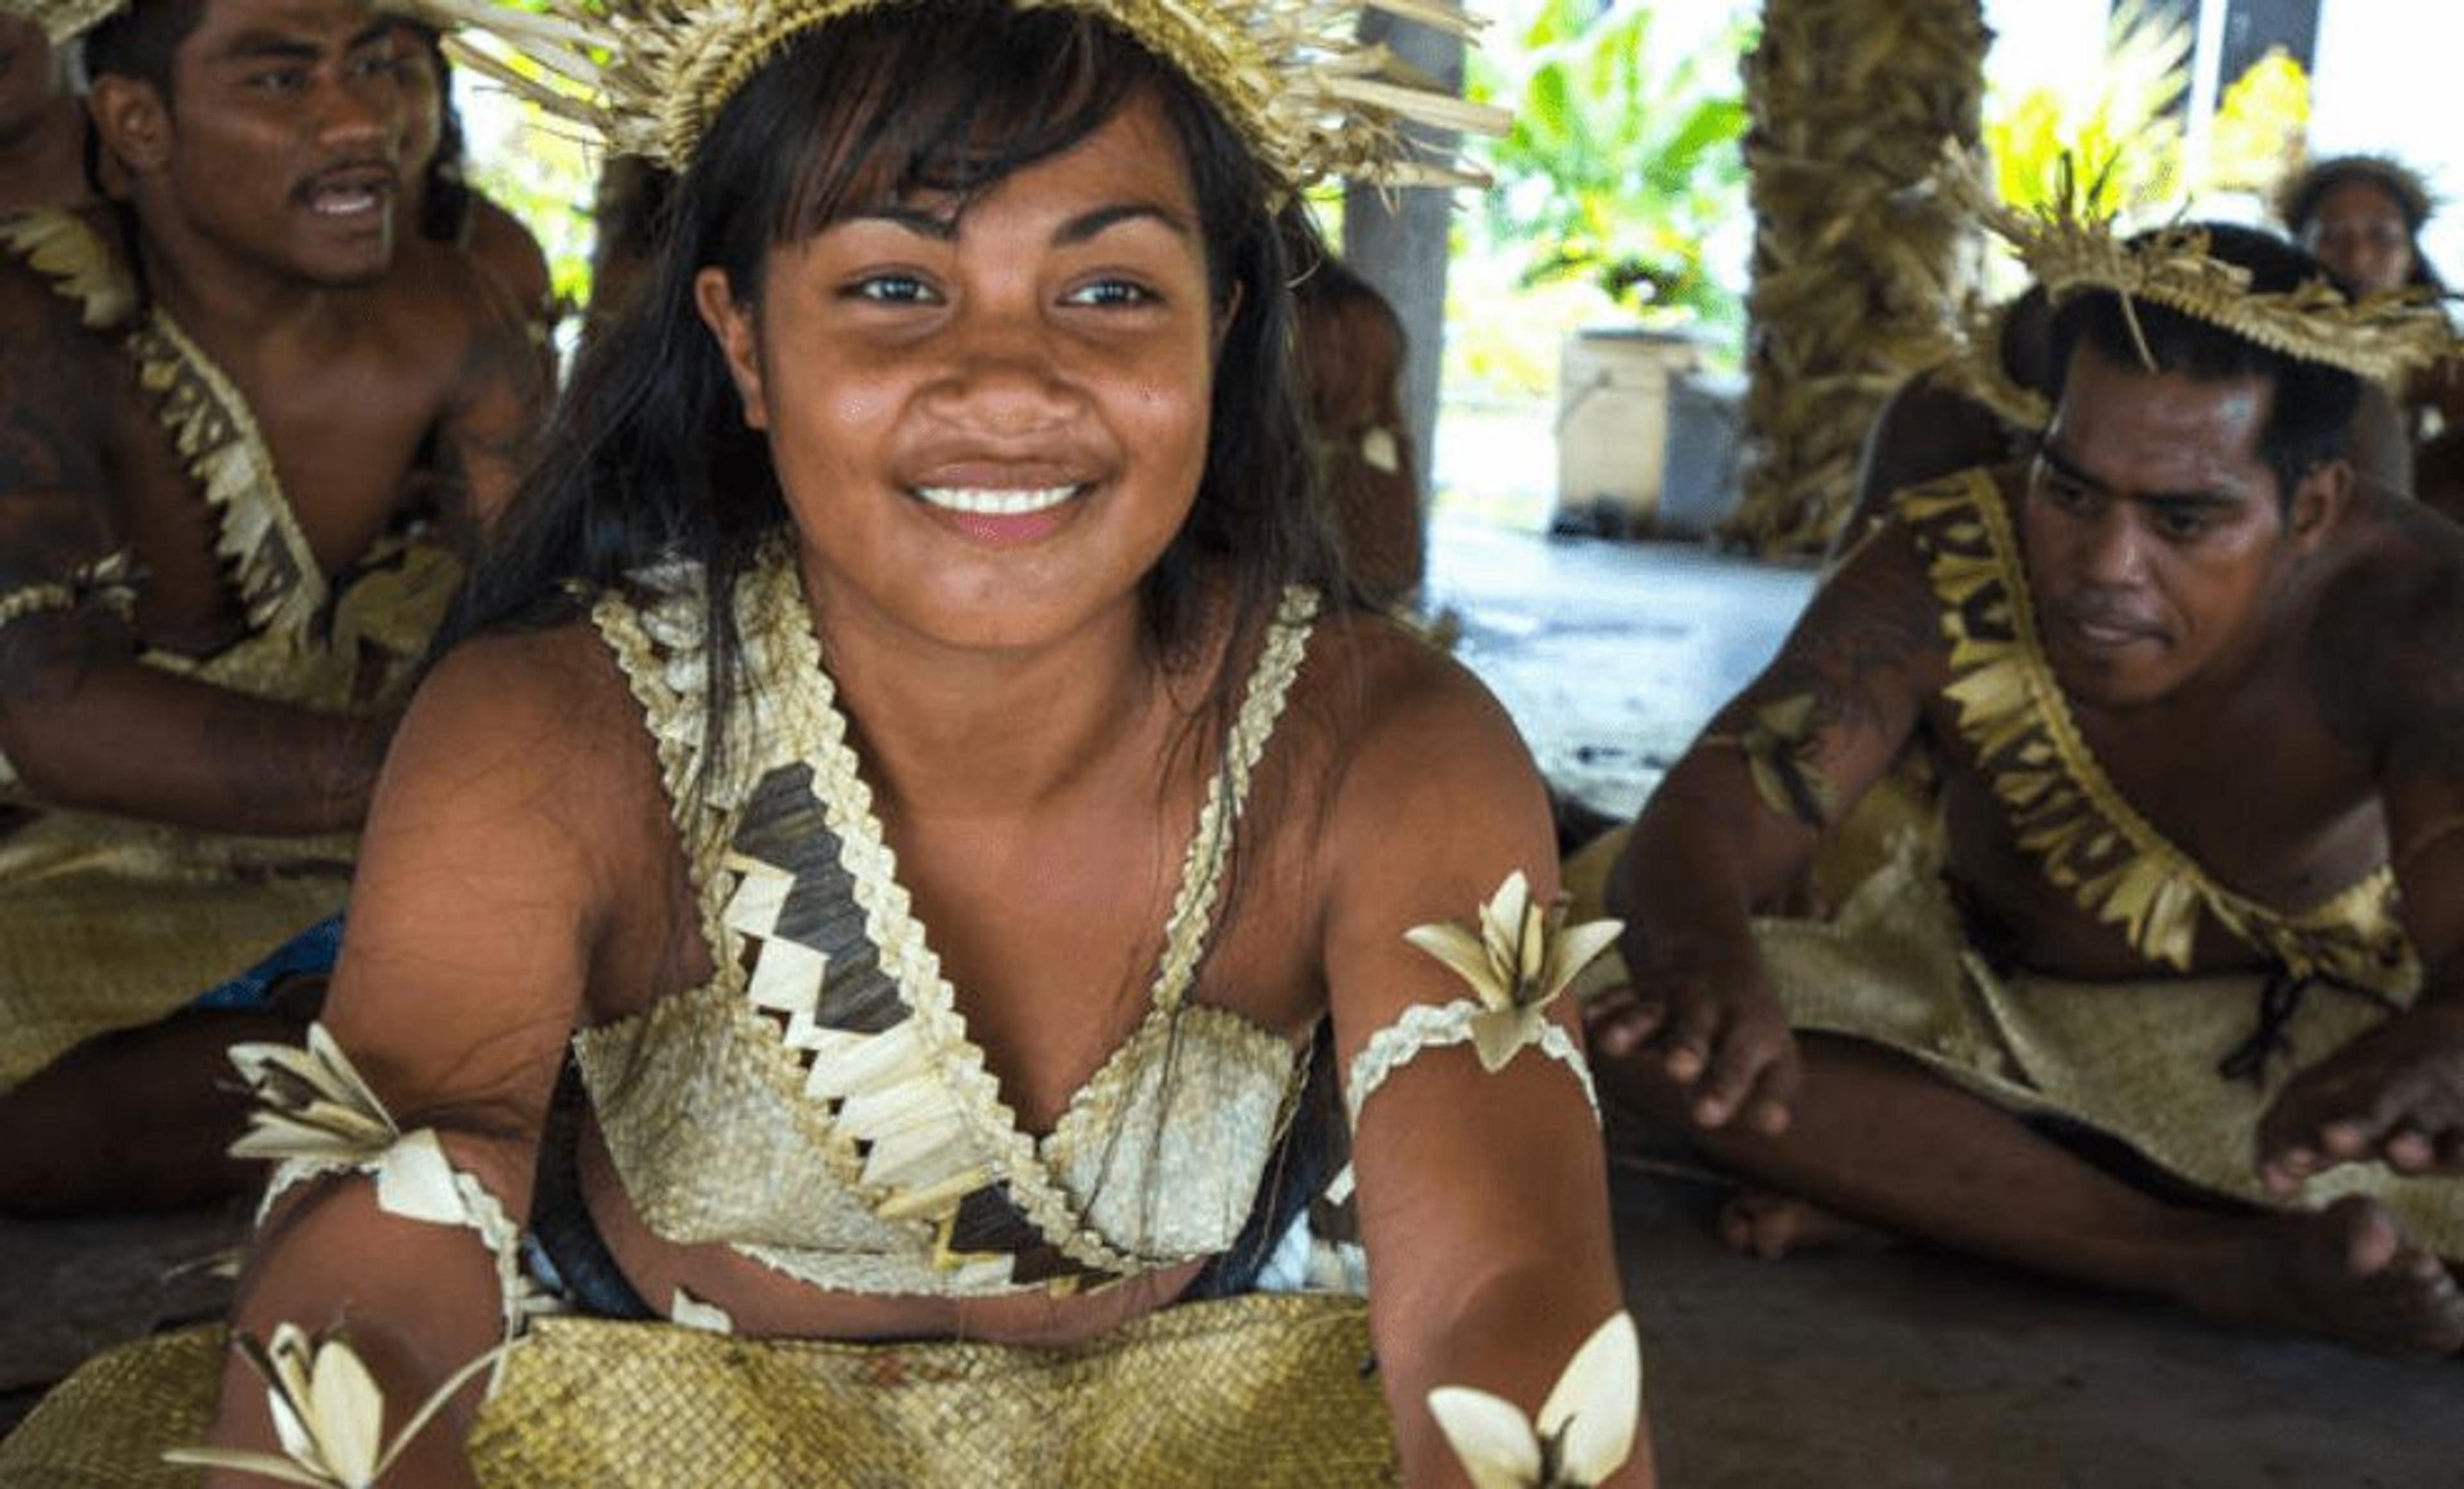 The Kiribati community in New Zealand will celebrate their language and culture in July. Photo/Supplied